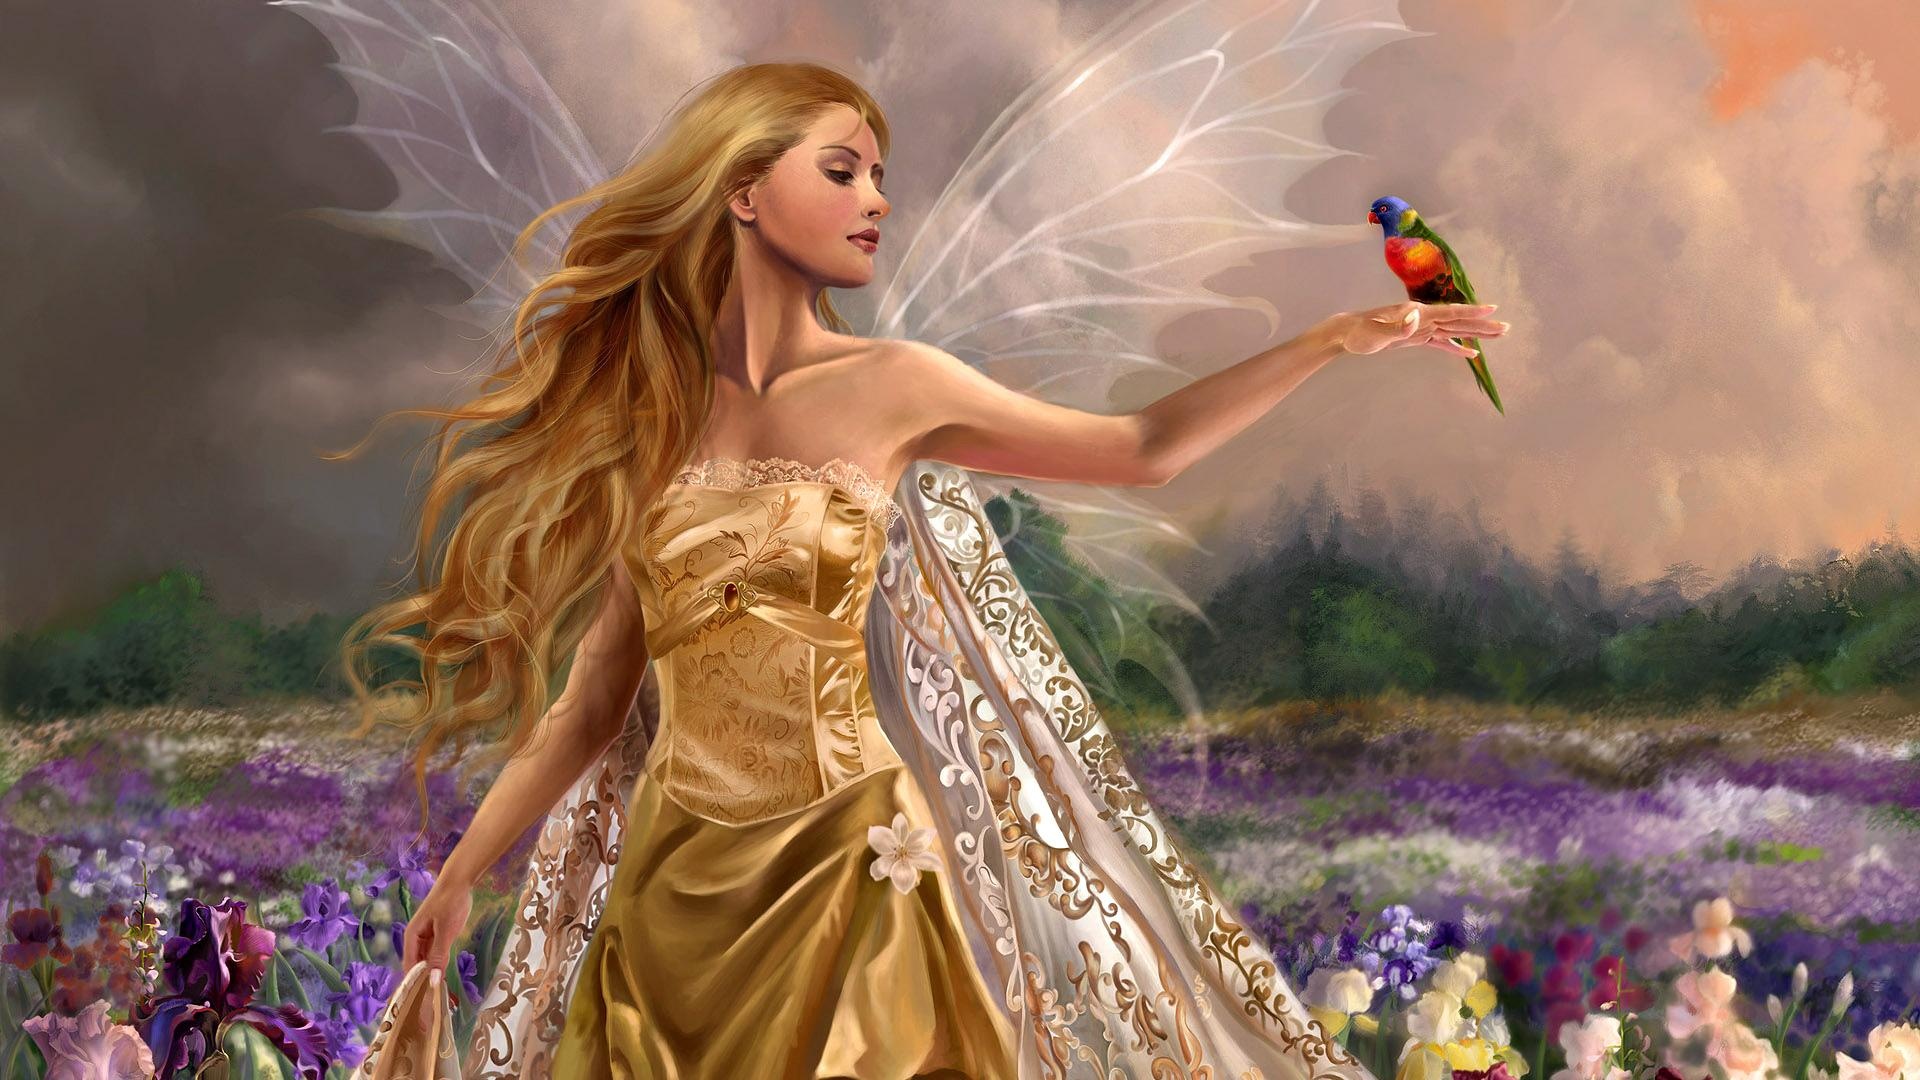 Fairy pictures, Fairy artwork, SF wallpaper, Magical fairy images, 1920x1080 Full HD Desktop